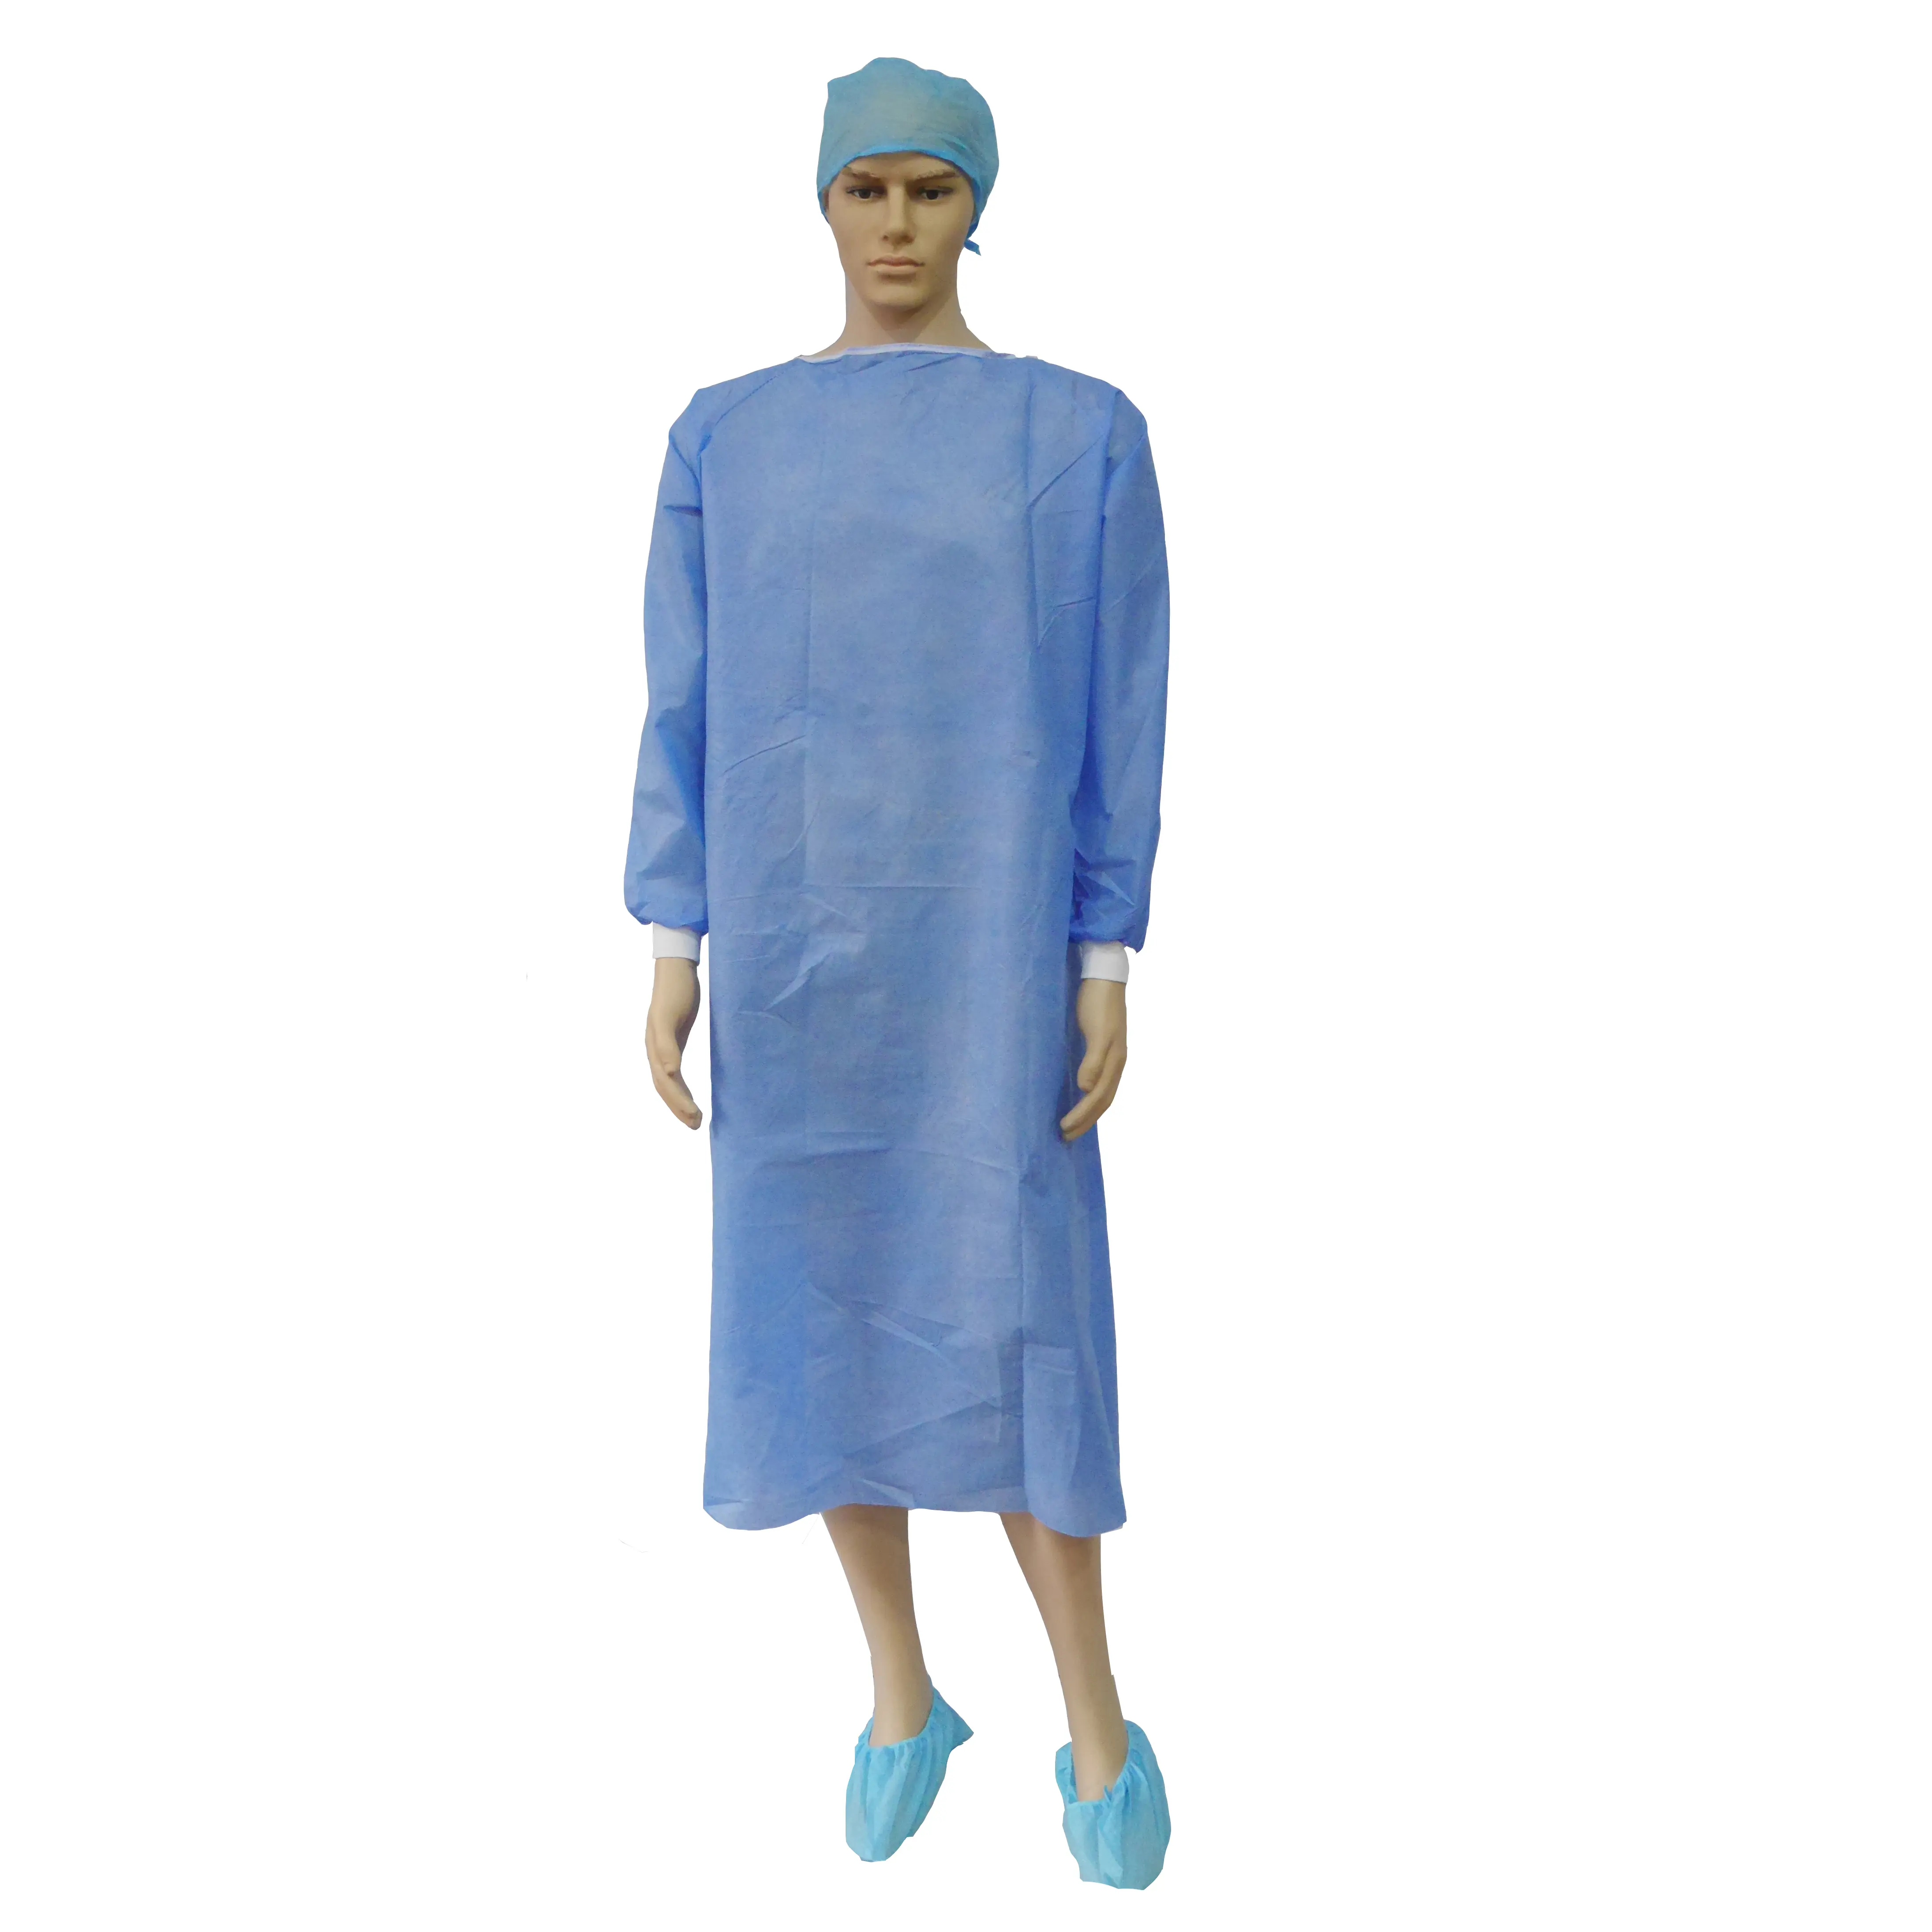 Junlong 45g SMS Medical Isolation Gown Sterile Surgical Disposable Gown